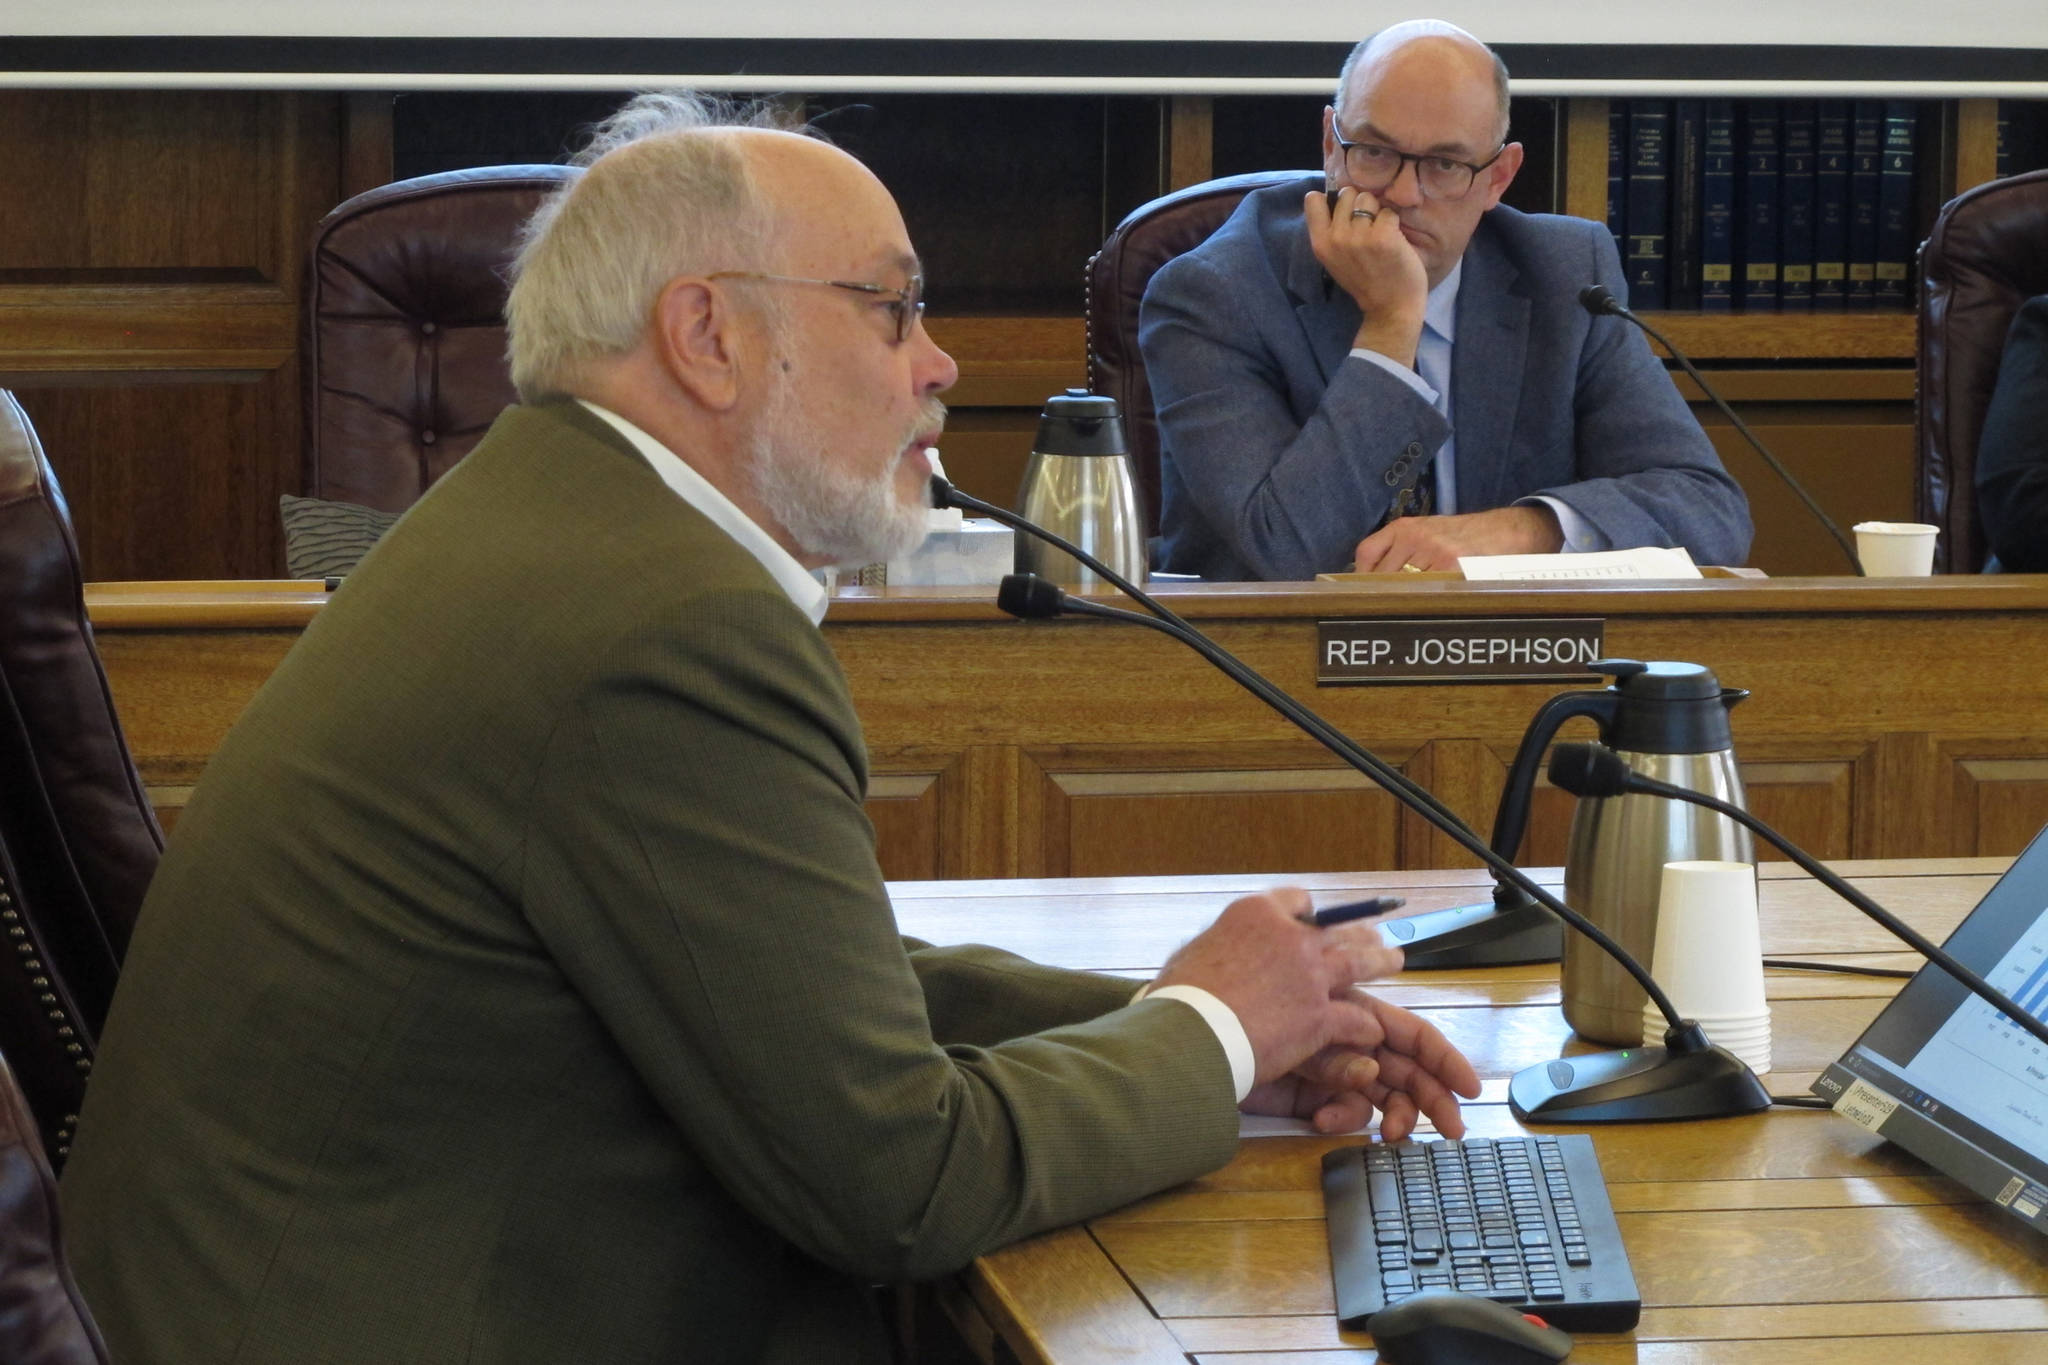 Joe Geldhof, left, testifies before the Alaska House Finance Committee on Thursday, May 23, 2019, in Juneau, Alaska as Rep. Andy Josephson listens. The committee heard a bill that proposes a full Alaska Permanent Fund Dividend this year but seeks changes to the dividend formula going forward. (Becky Bohrer | Associated Press)